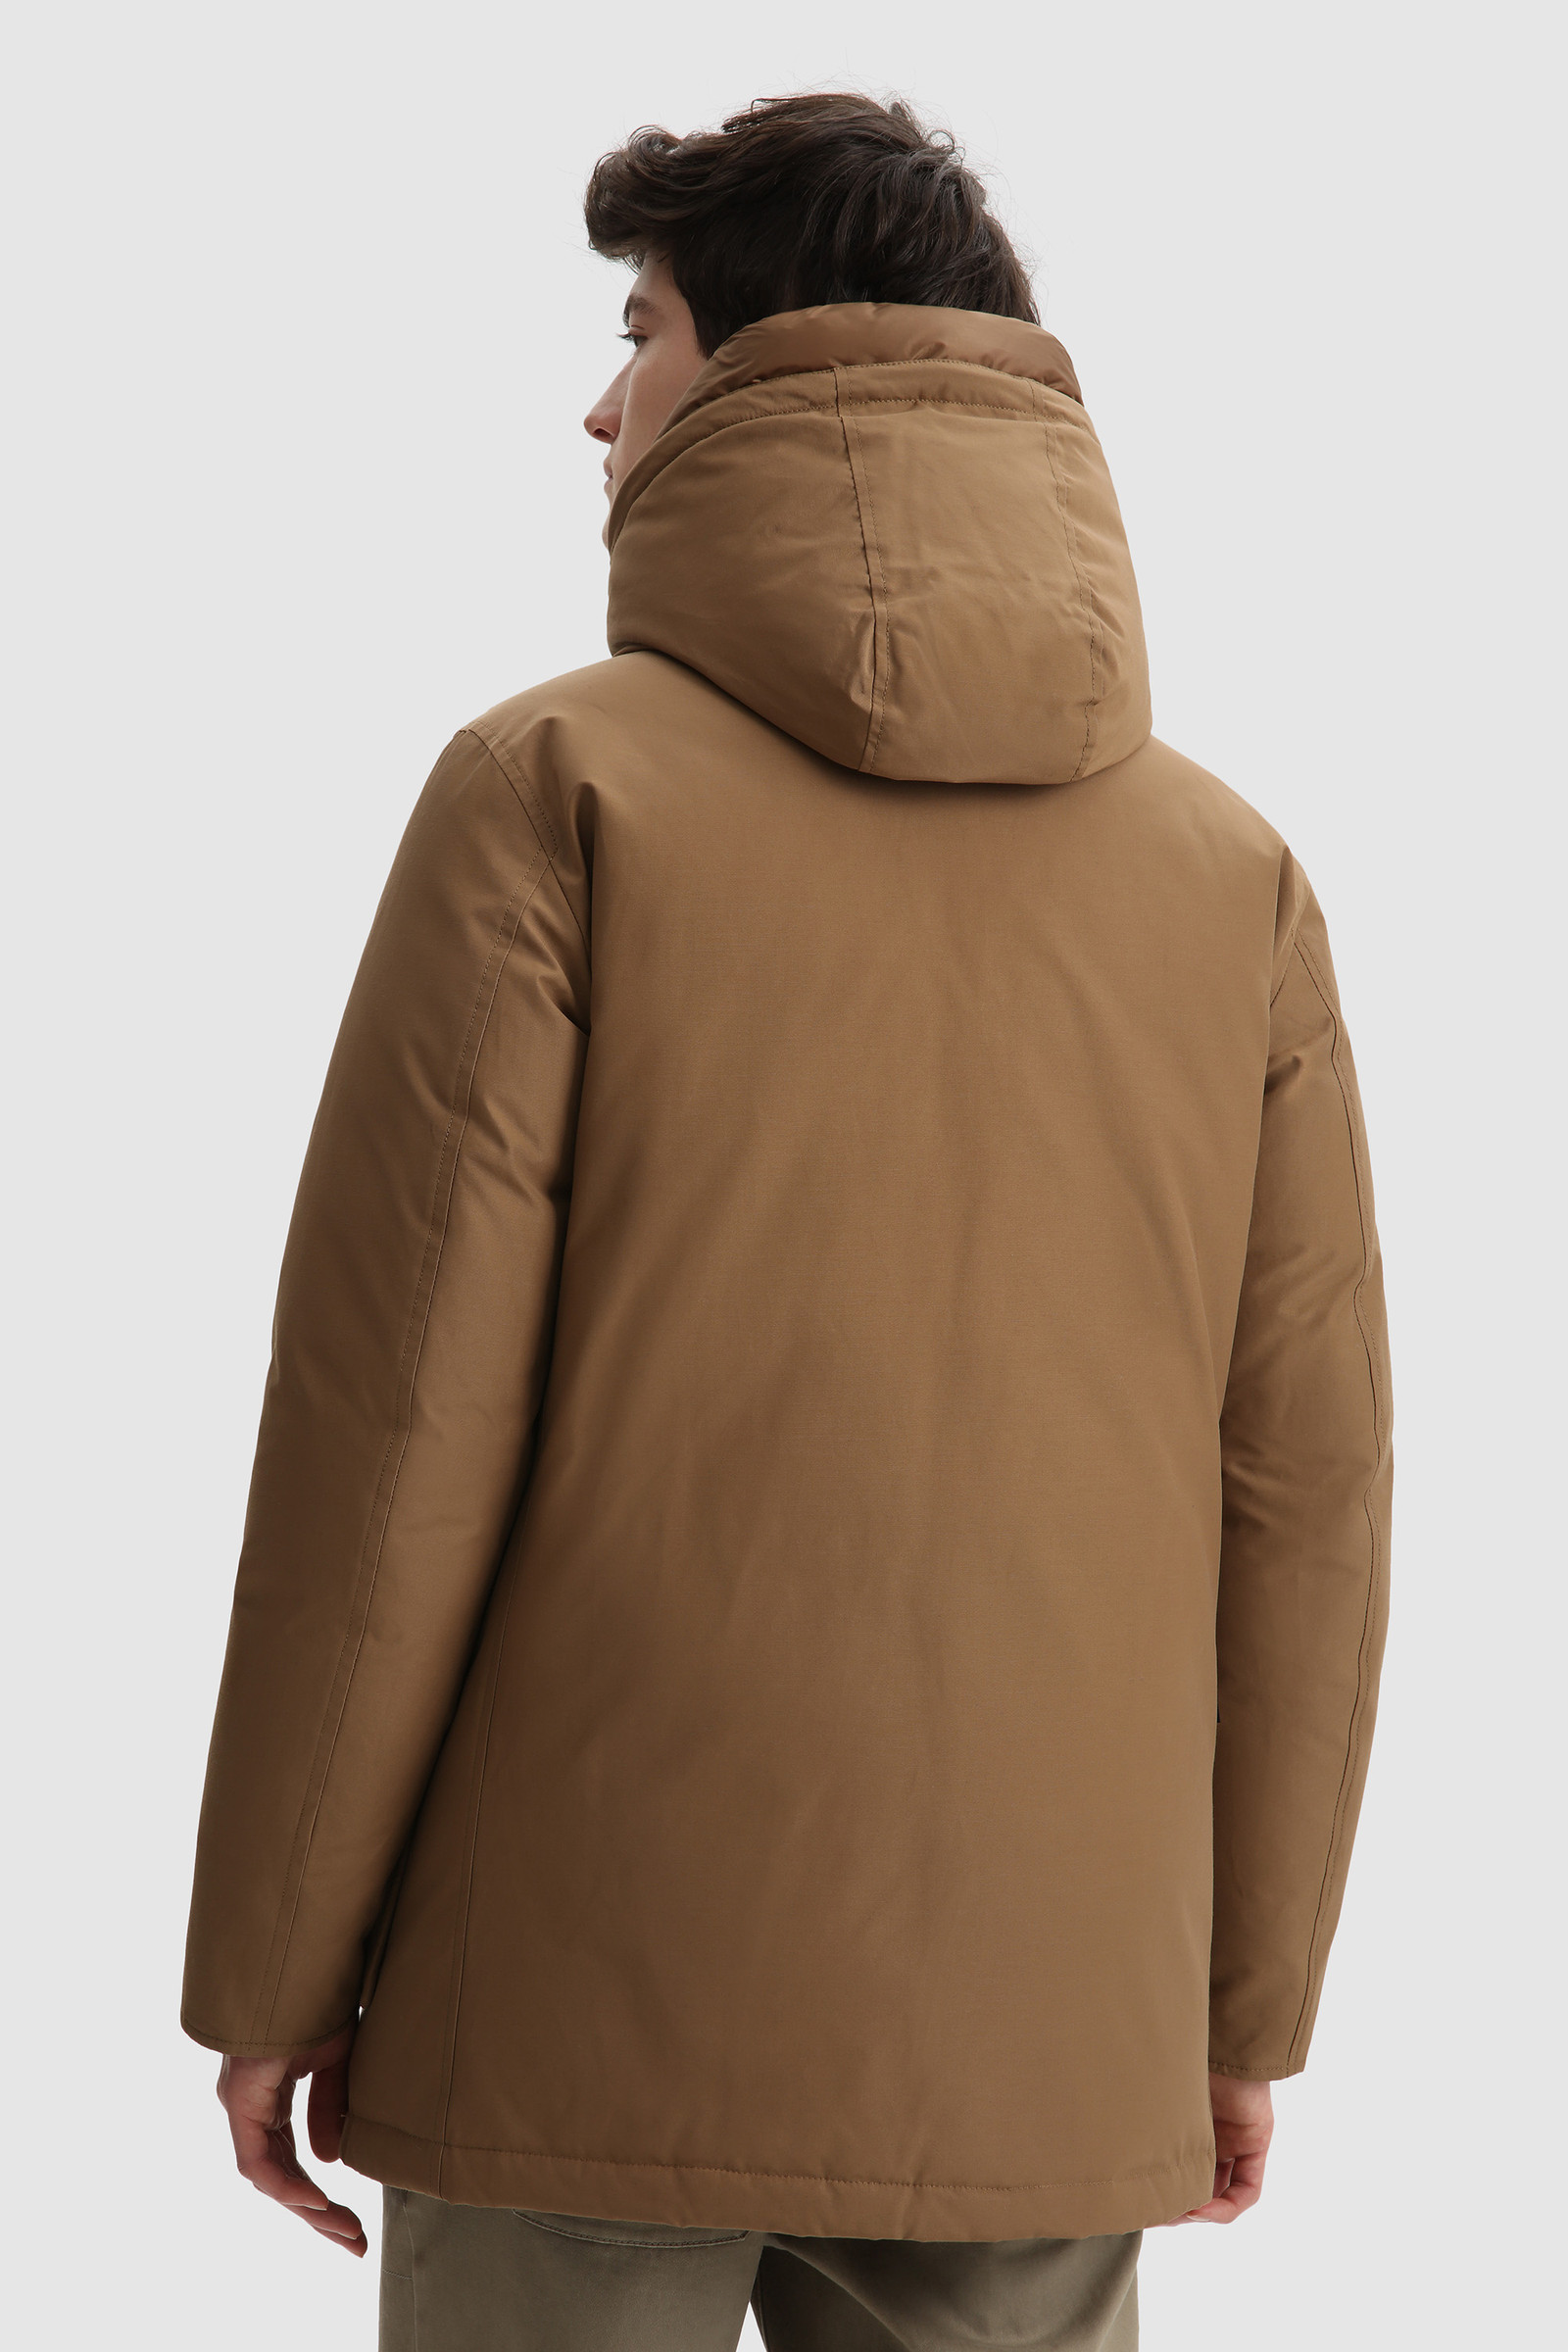 Arctic Parka in Ramar with Protective Hood - Men - Brown